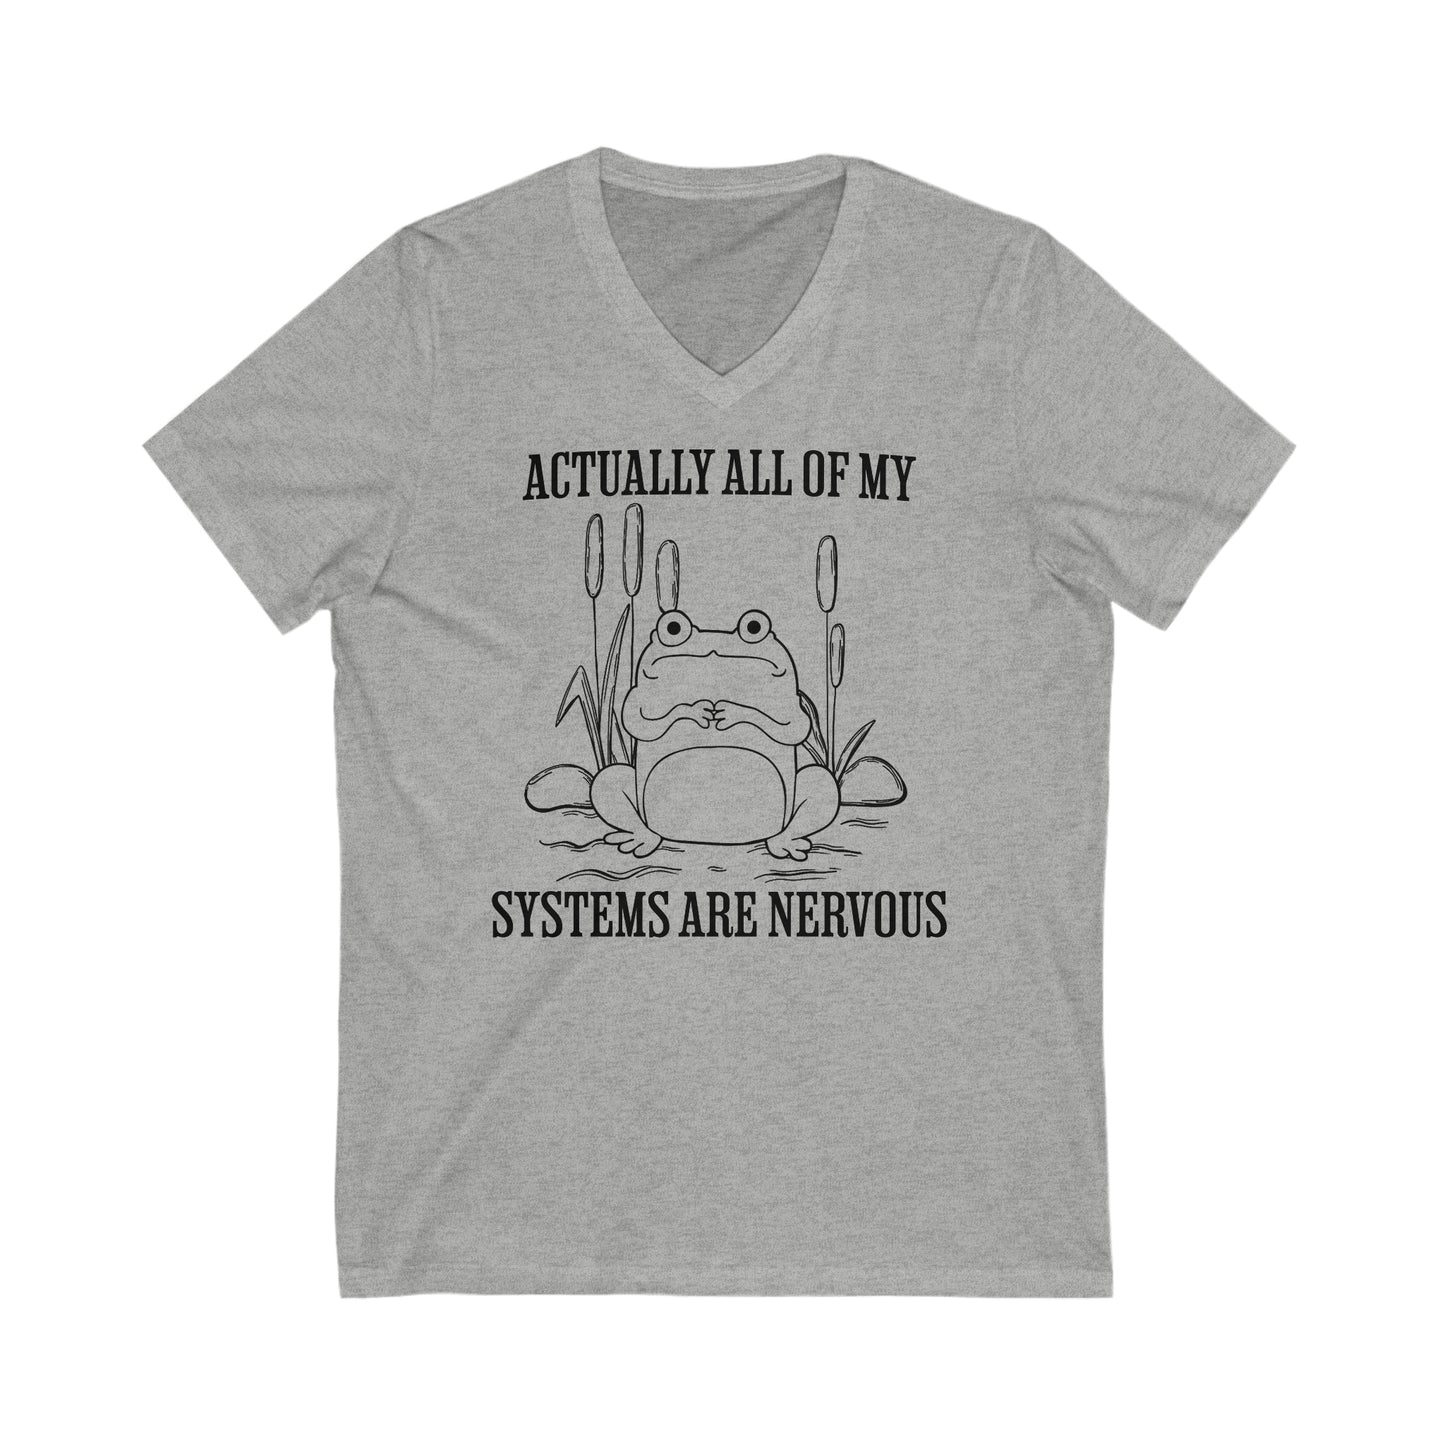 Actually, All of my Systems are Nervous - Unisex Jersey Short Sleeve V-Neck Tee